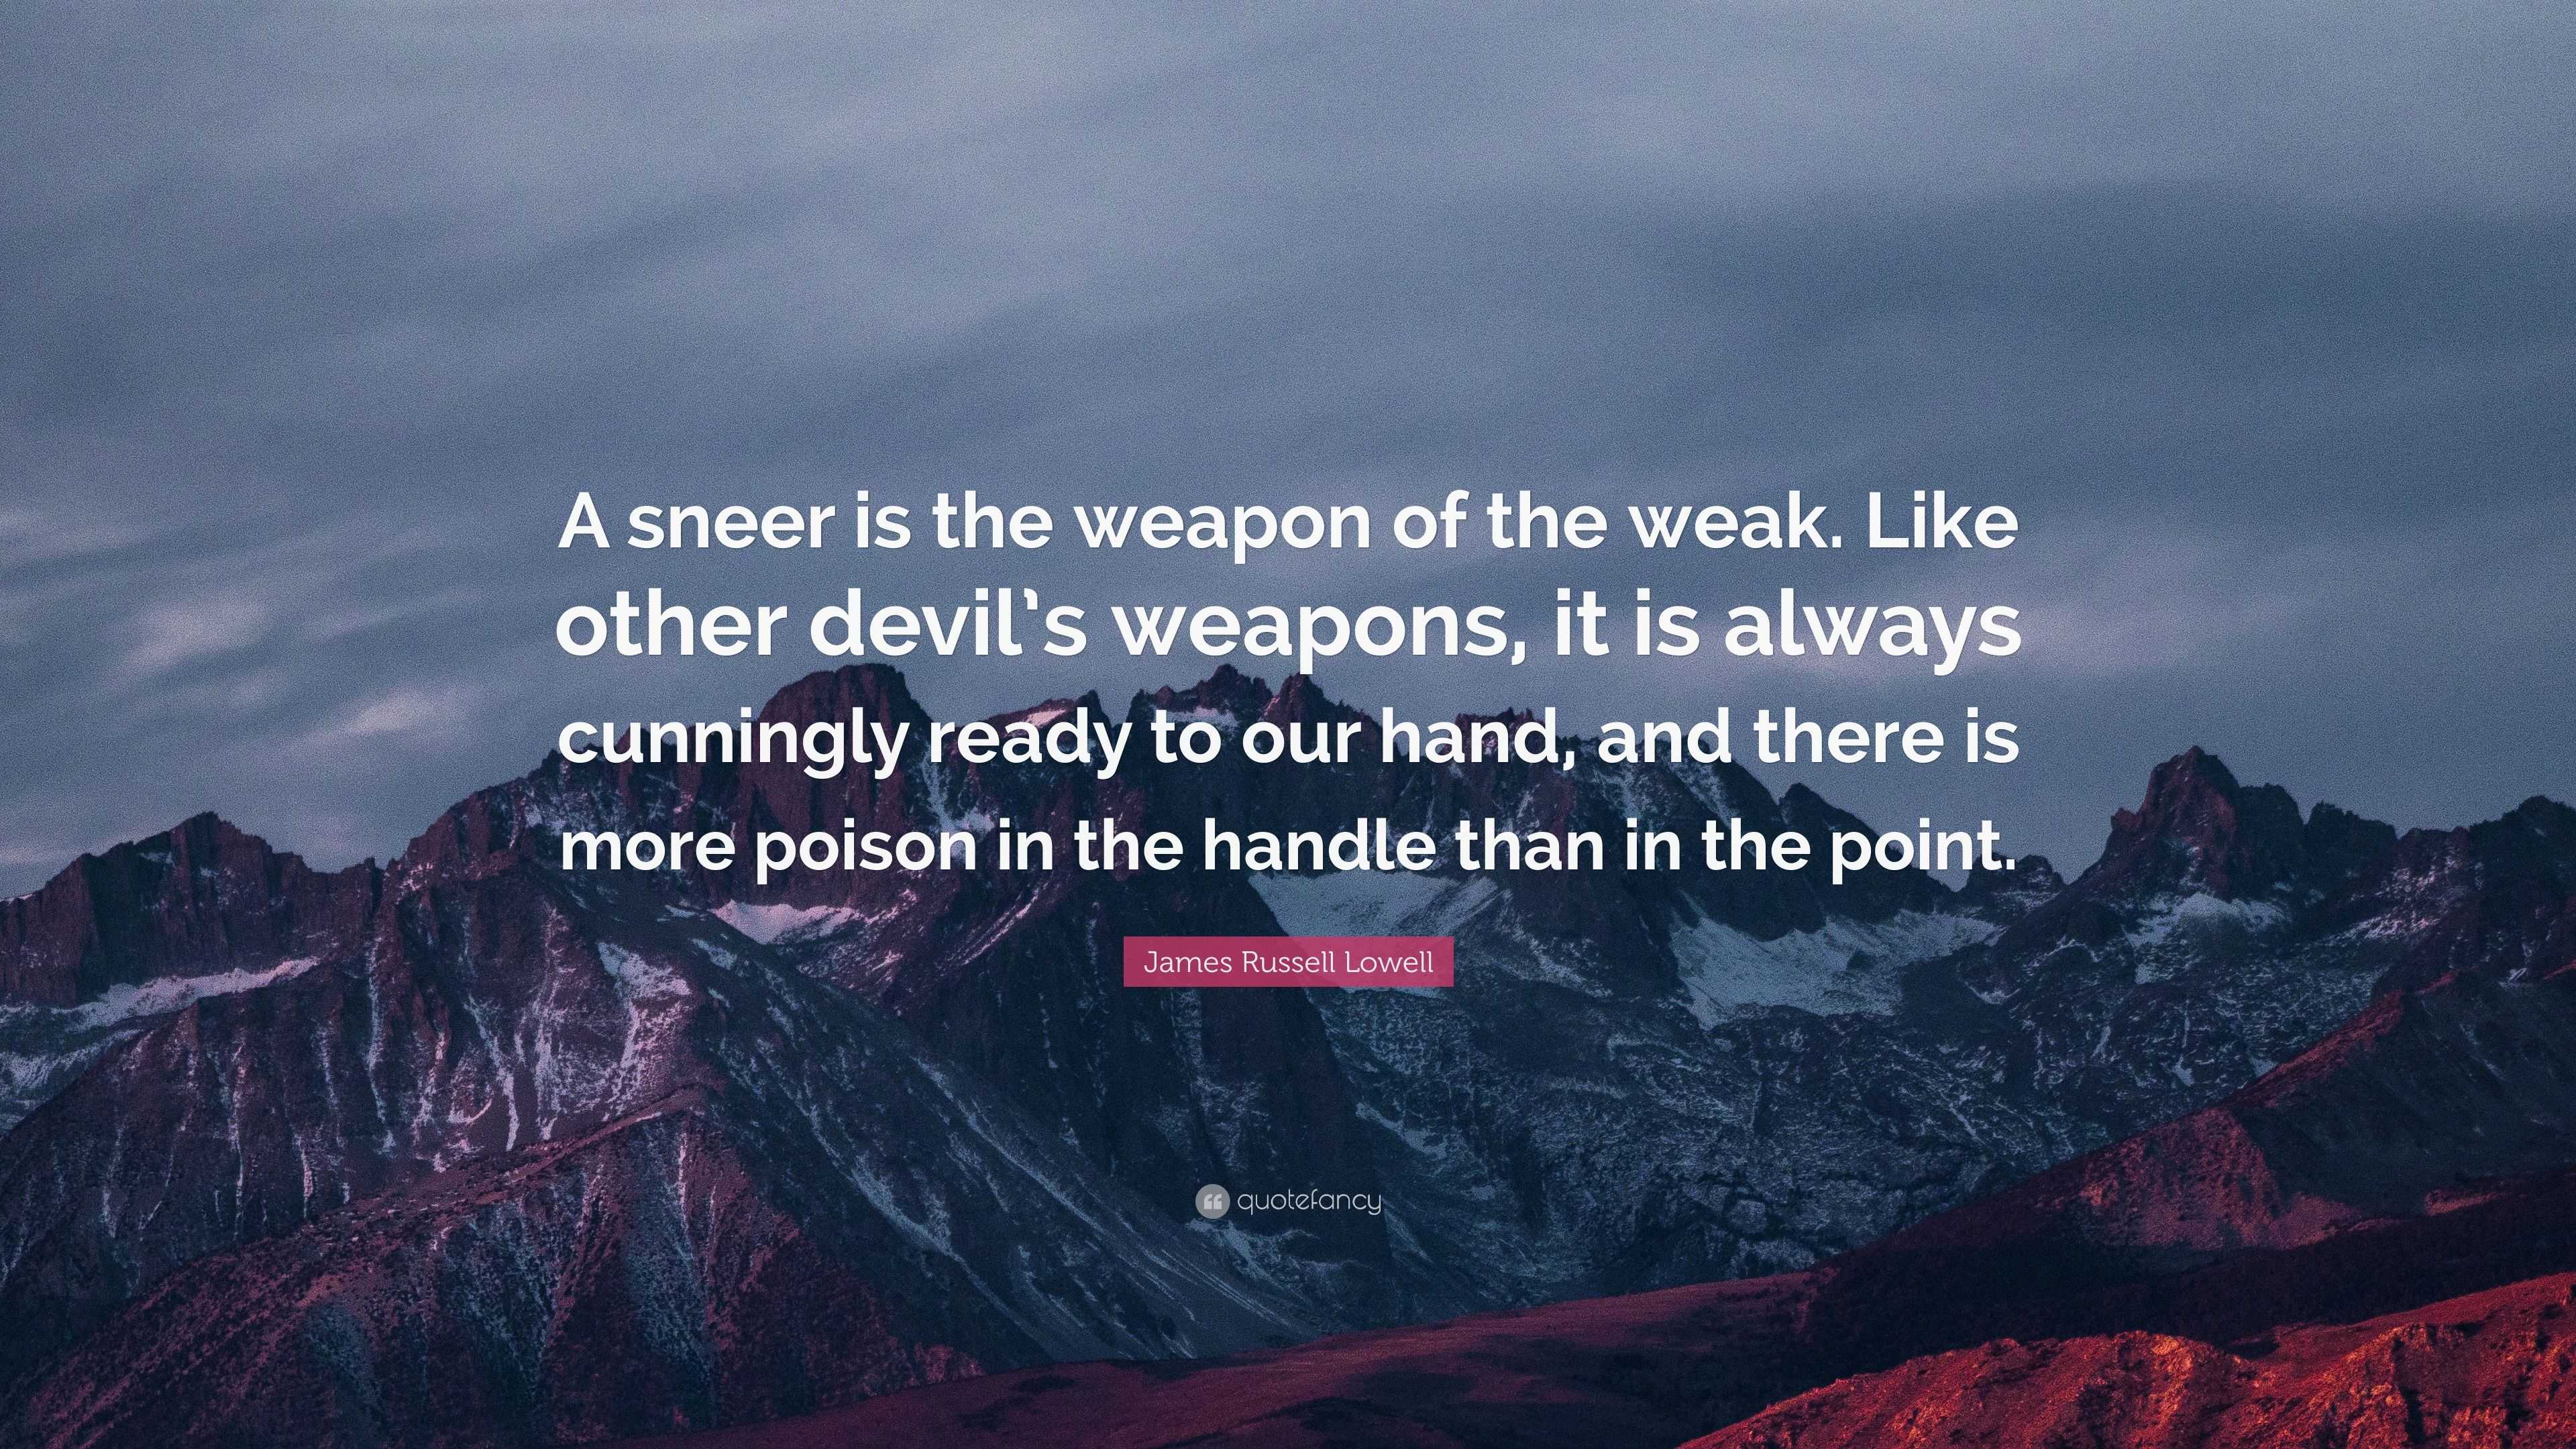 James Russell Lowell Quote: “A sneer is the weapon of the weak. Like ...